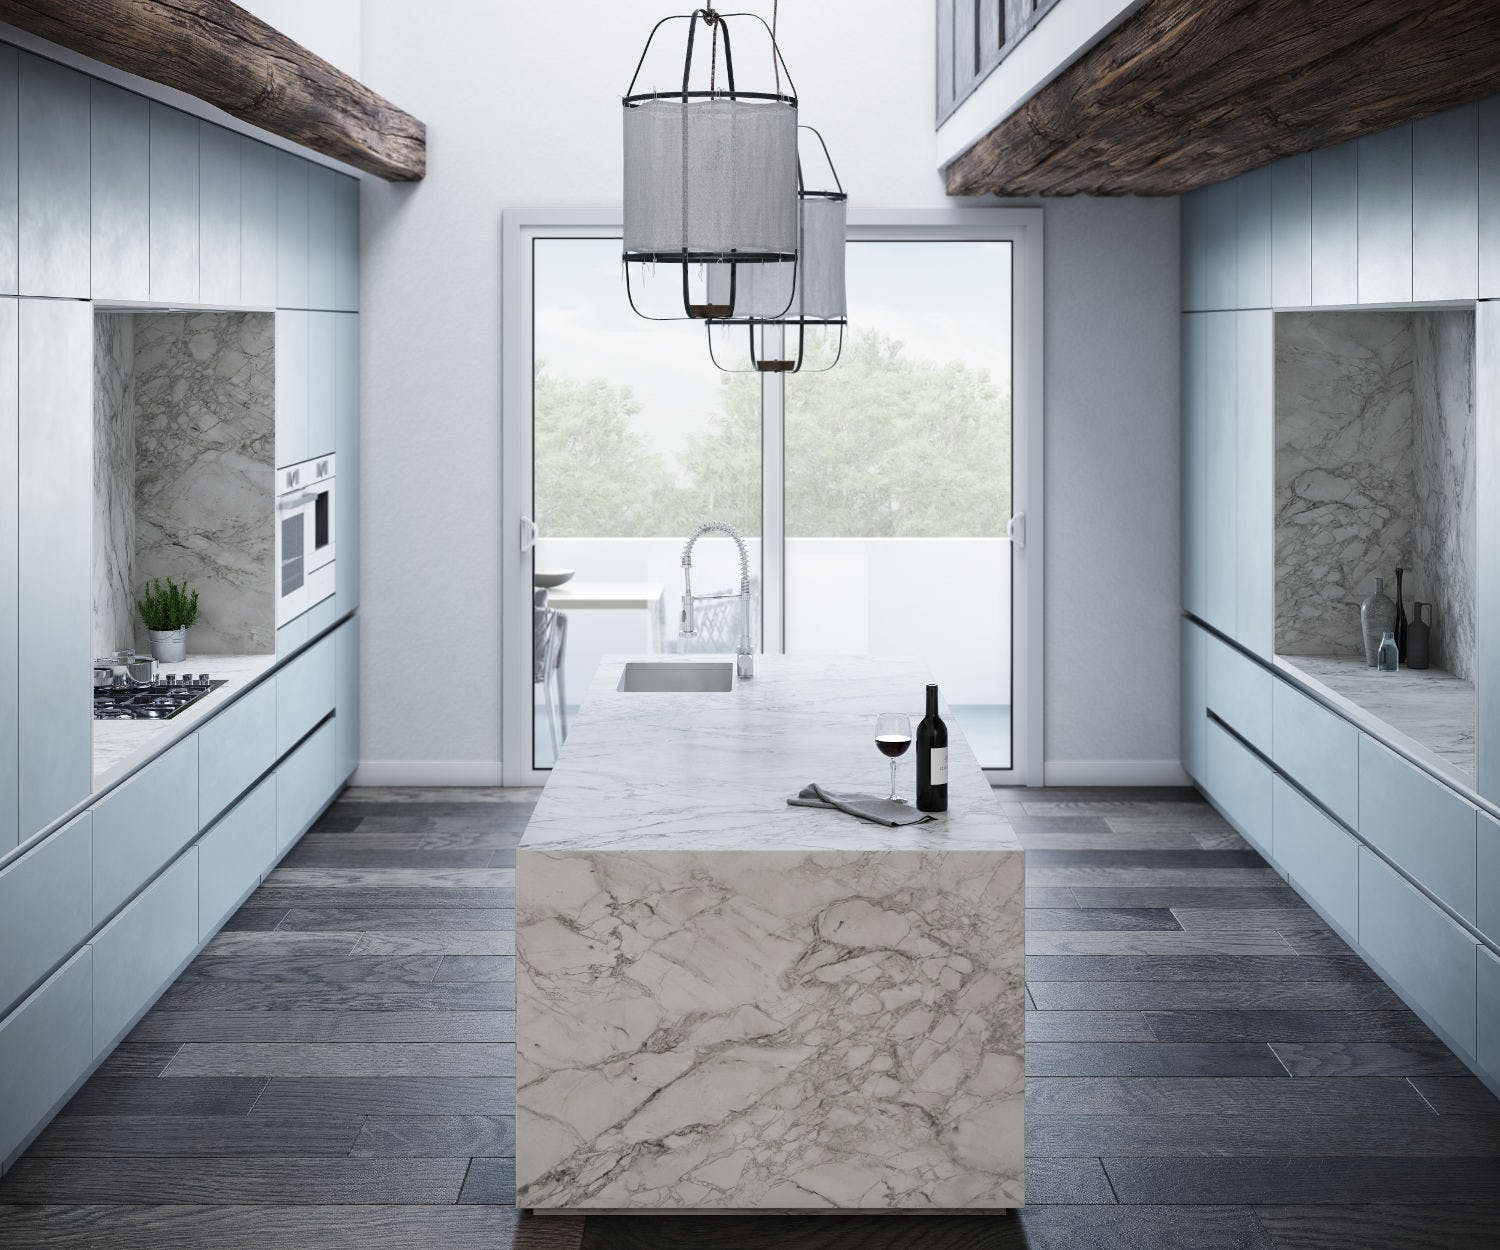 Image 41 of Dekton Kitchen Portum Velvet 1 in Compact kitchens: Who says they're a disadvantage? - Cosentino